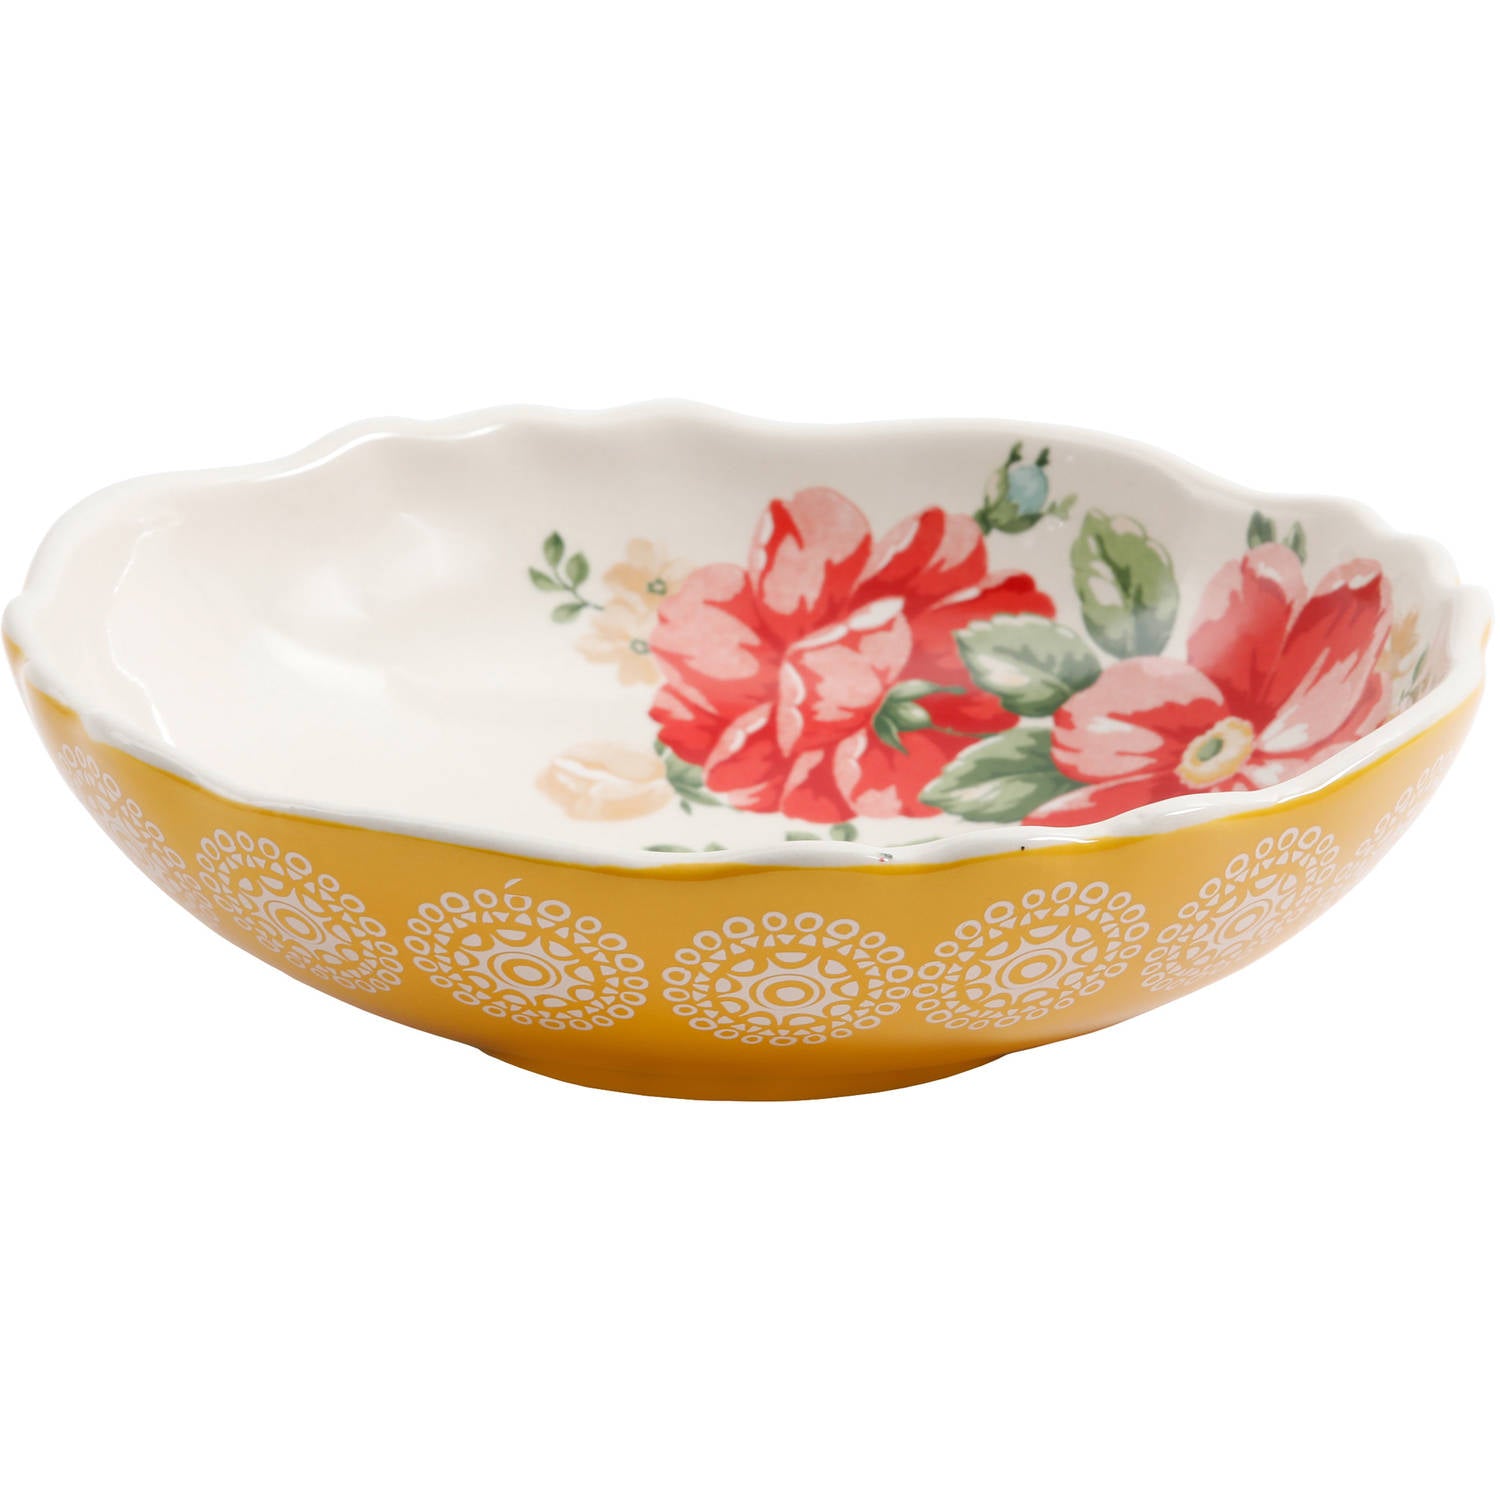 The Pioneer Woman Melody 7.5-Inch Pasta Bowls, Set of